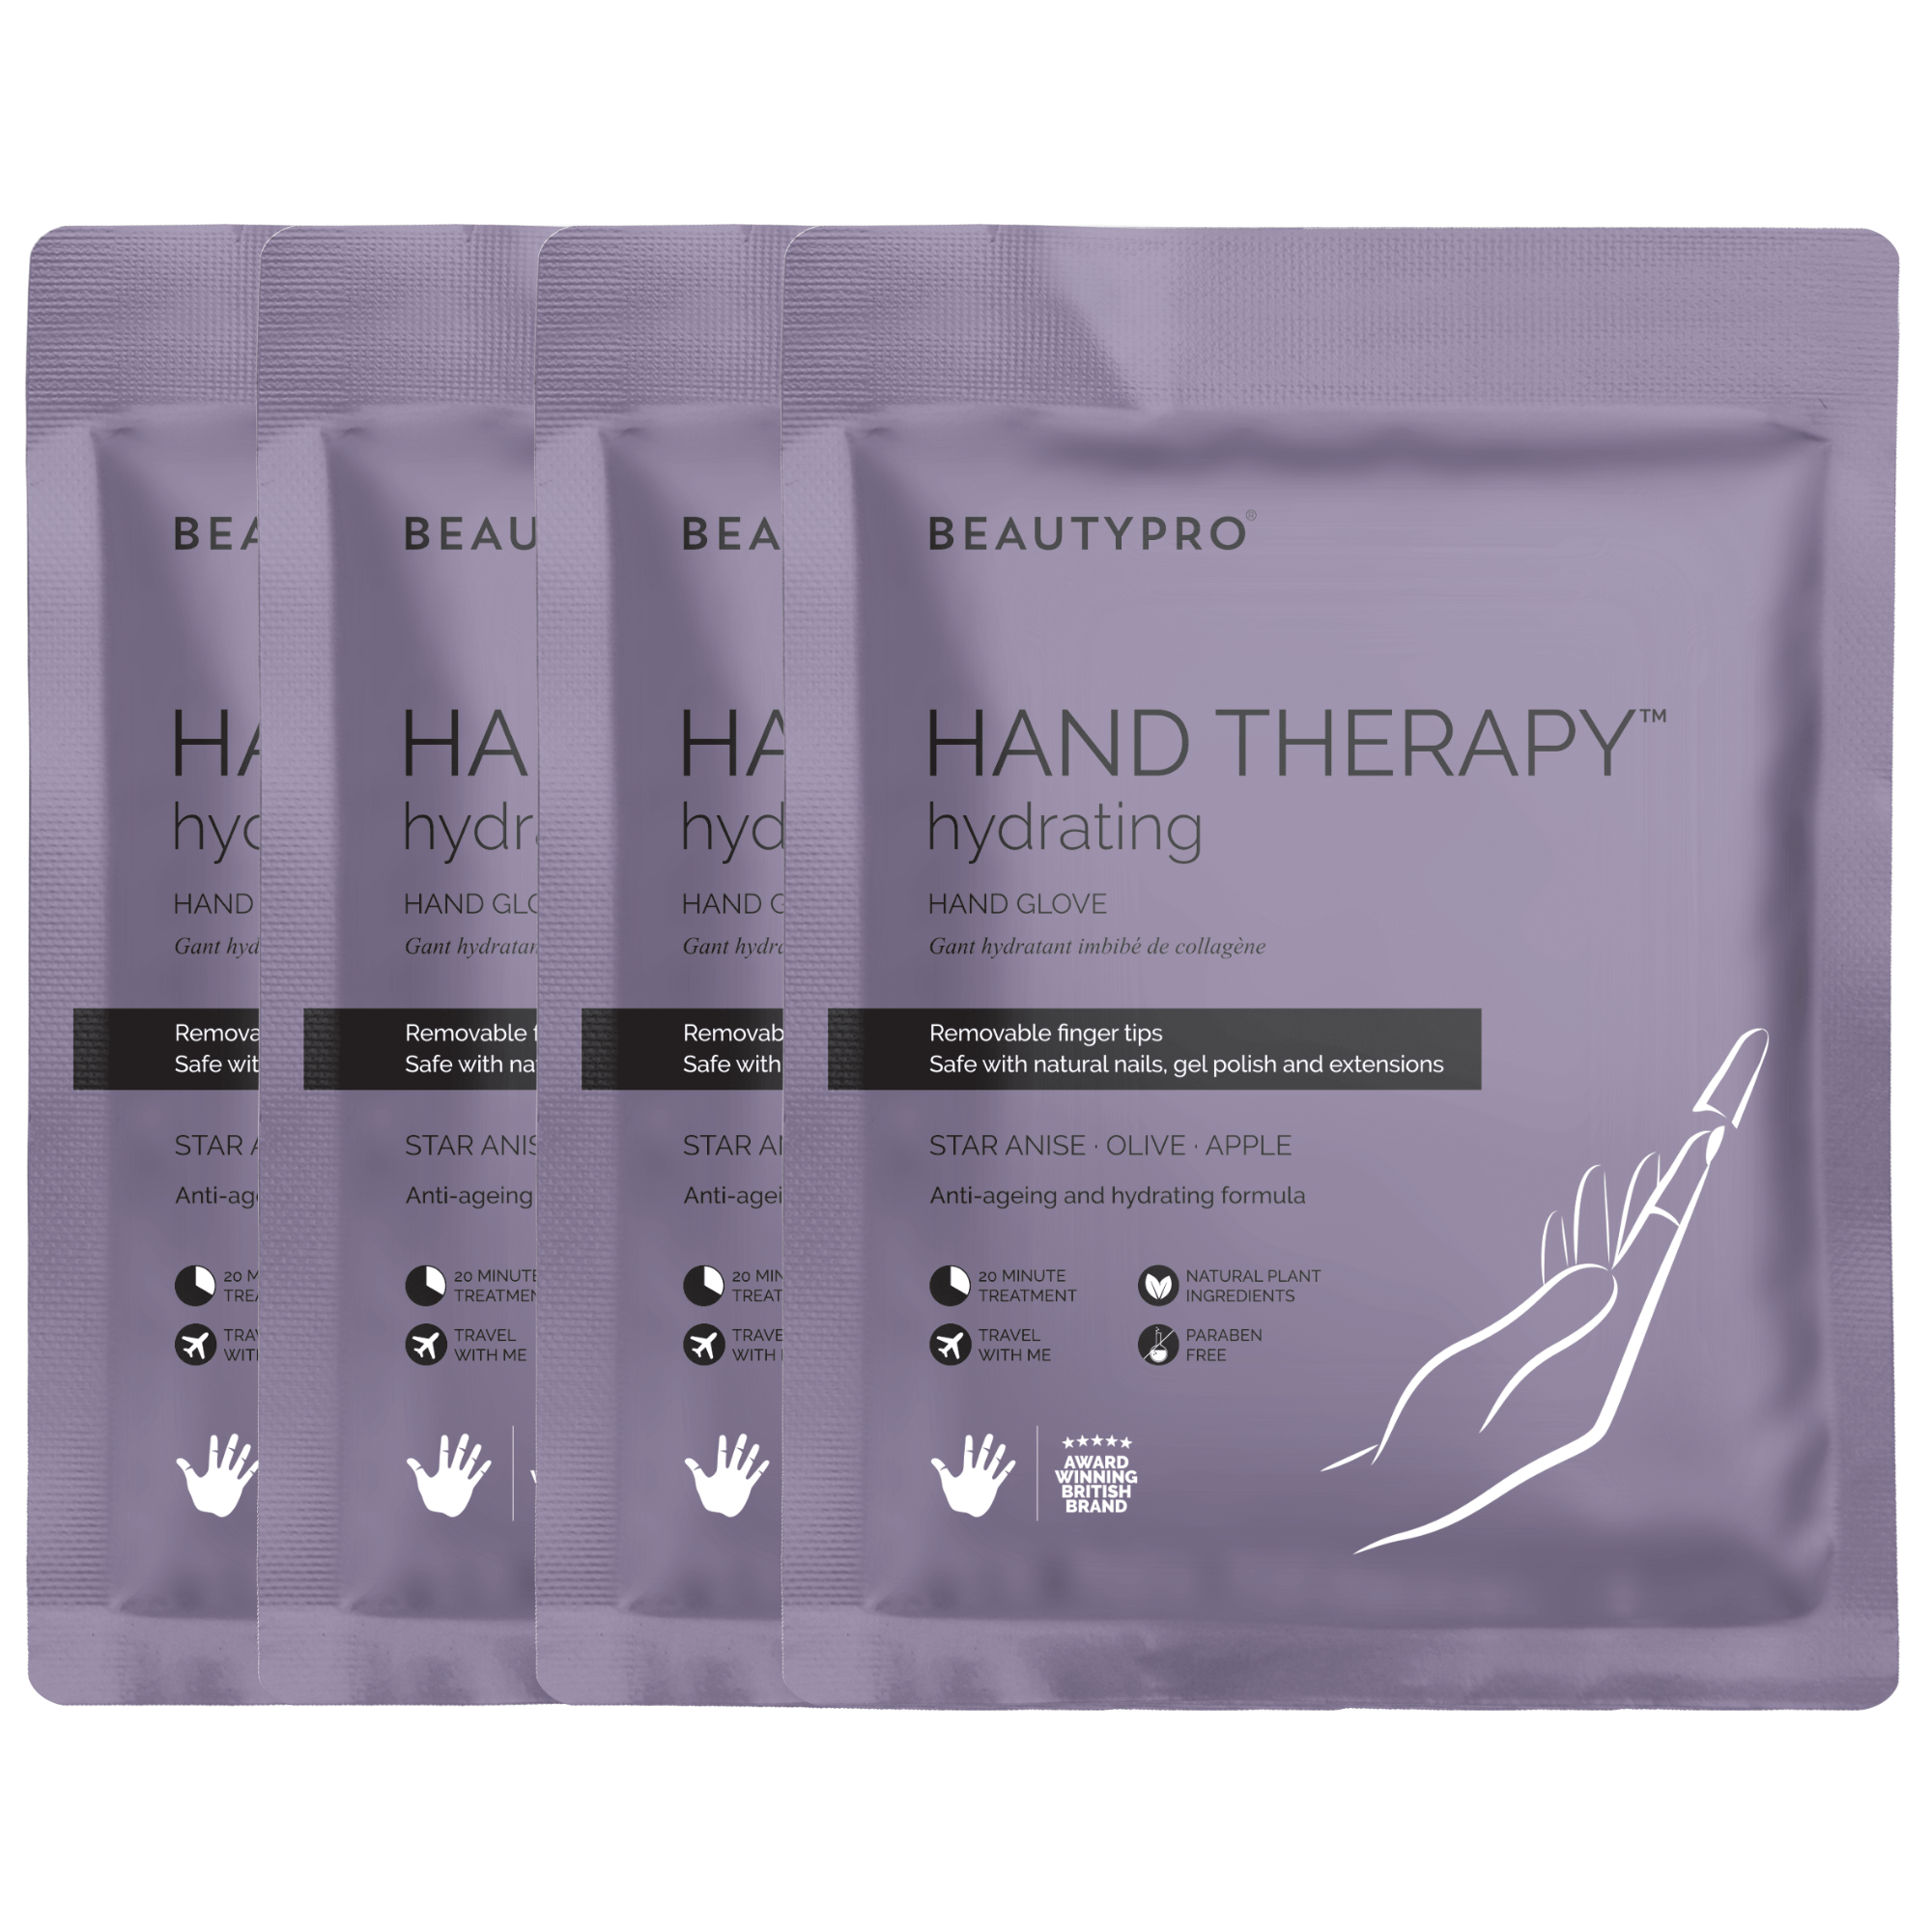 HAND THERAPY Glove with Removable Finger Tips